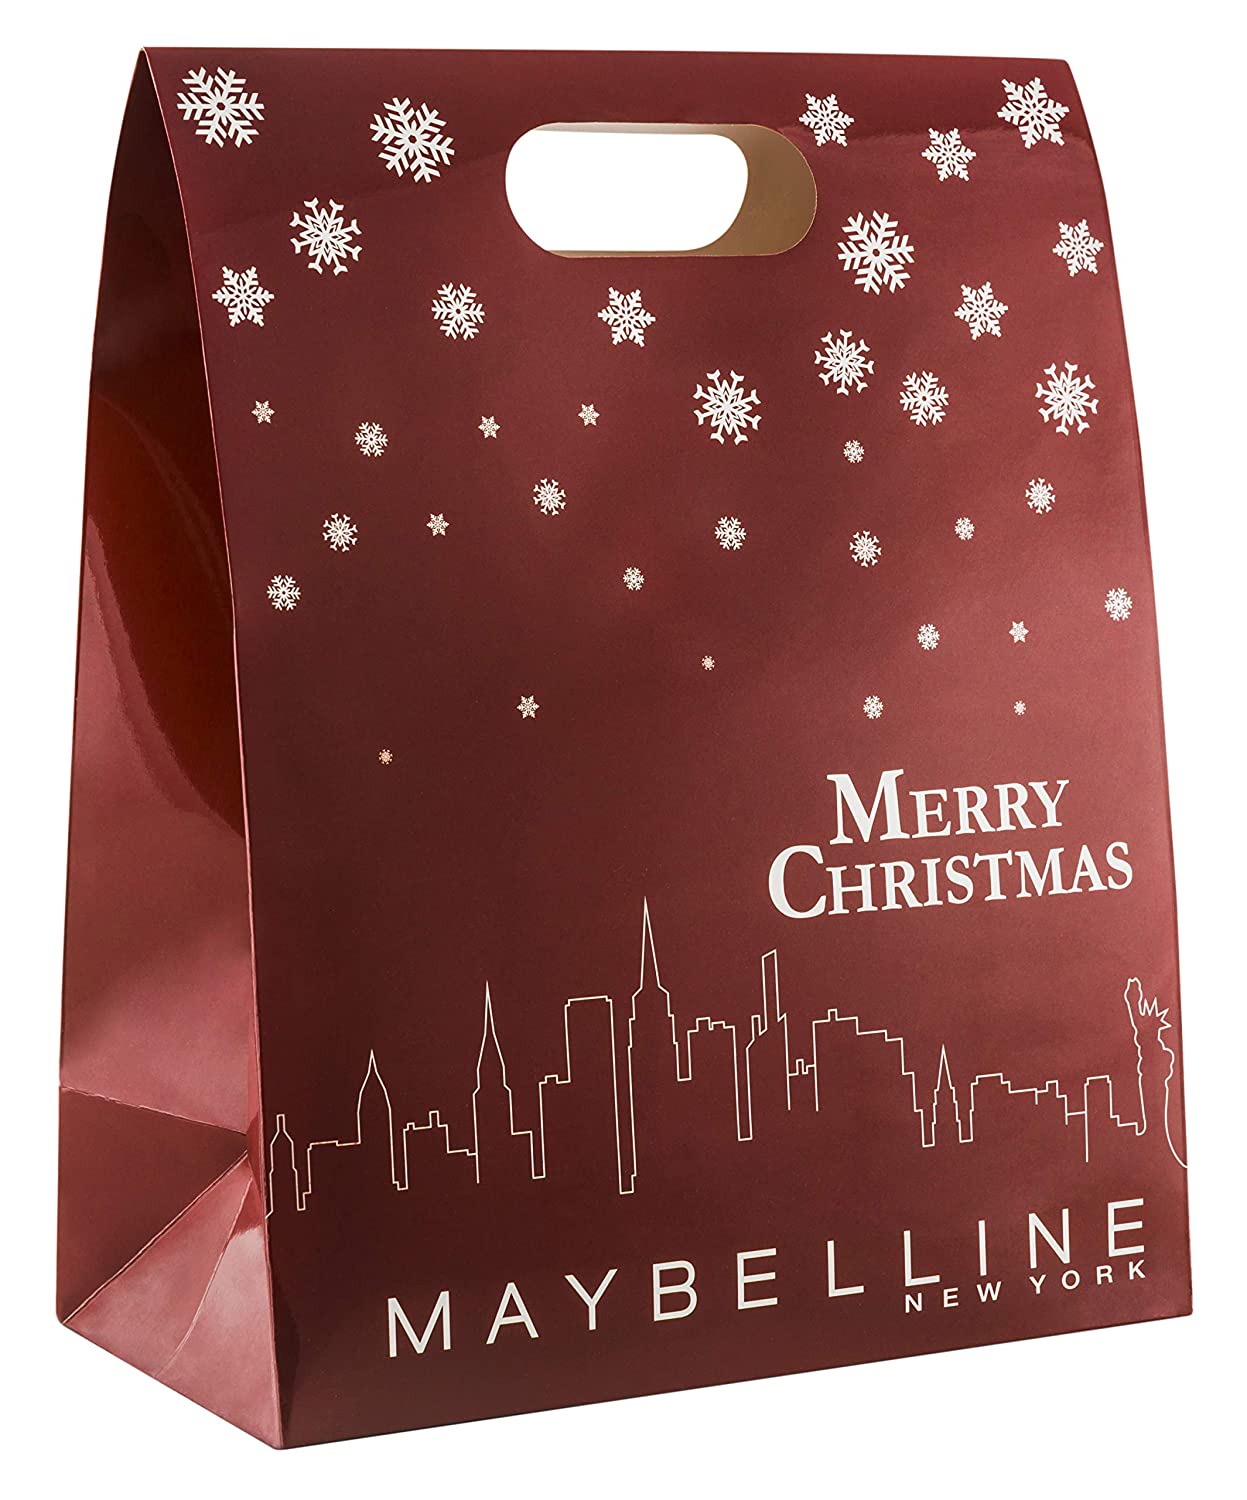 Maybelline New York Advent calendar - DIY with 24 beauty products, bags and stickers for filling and crafting.